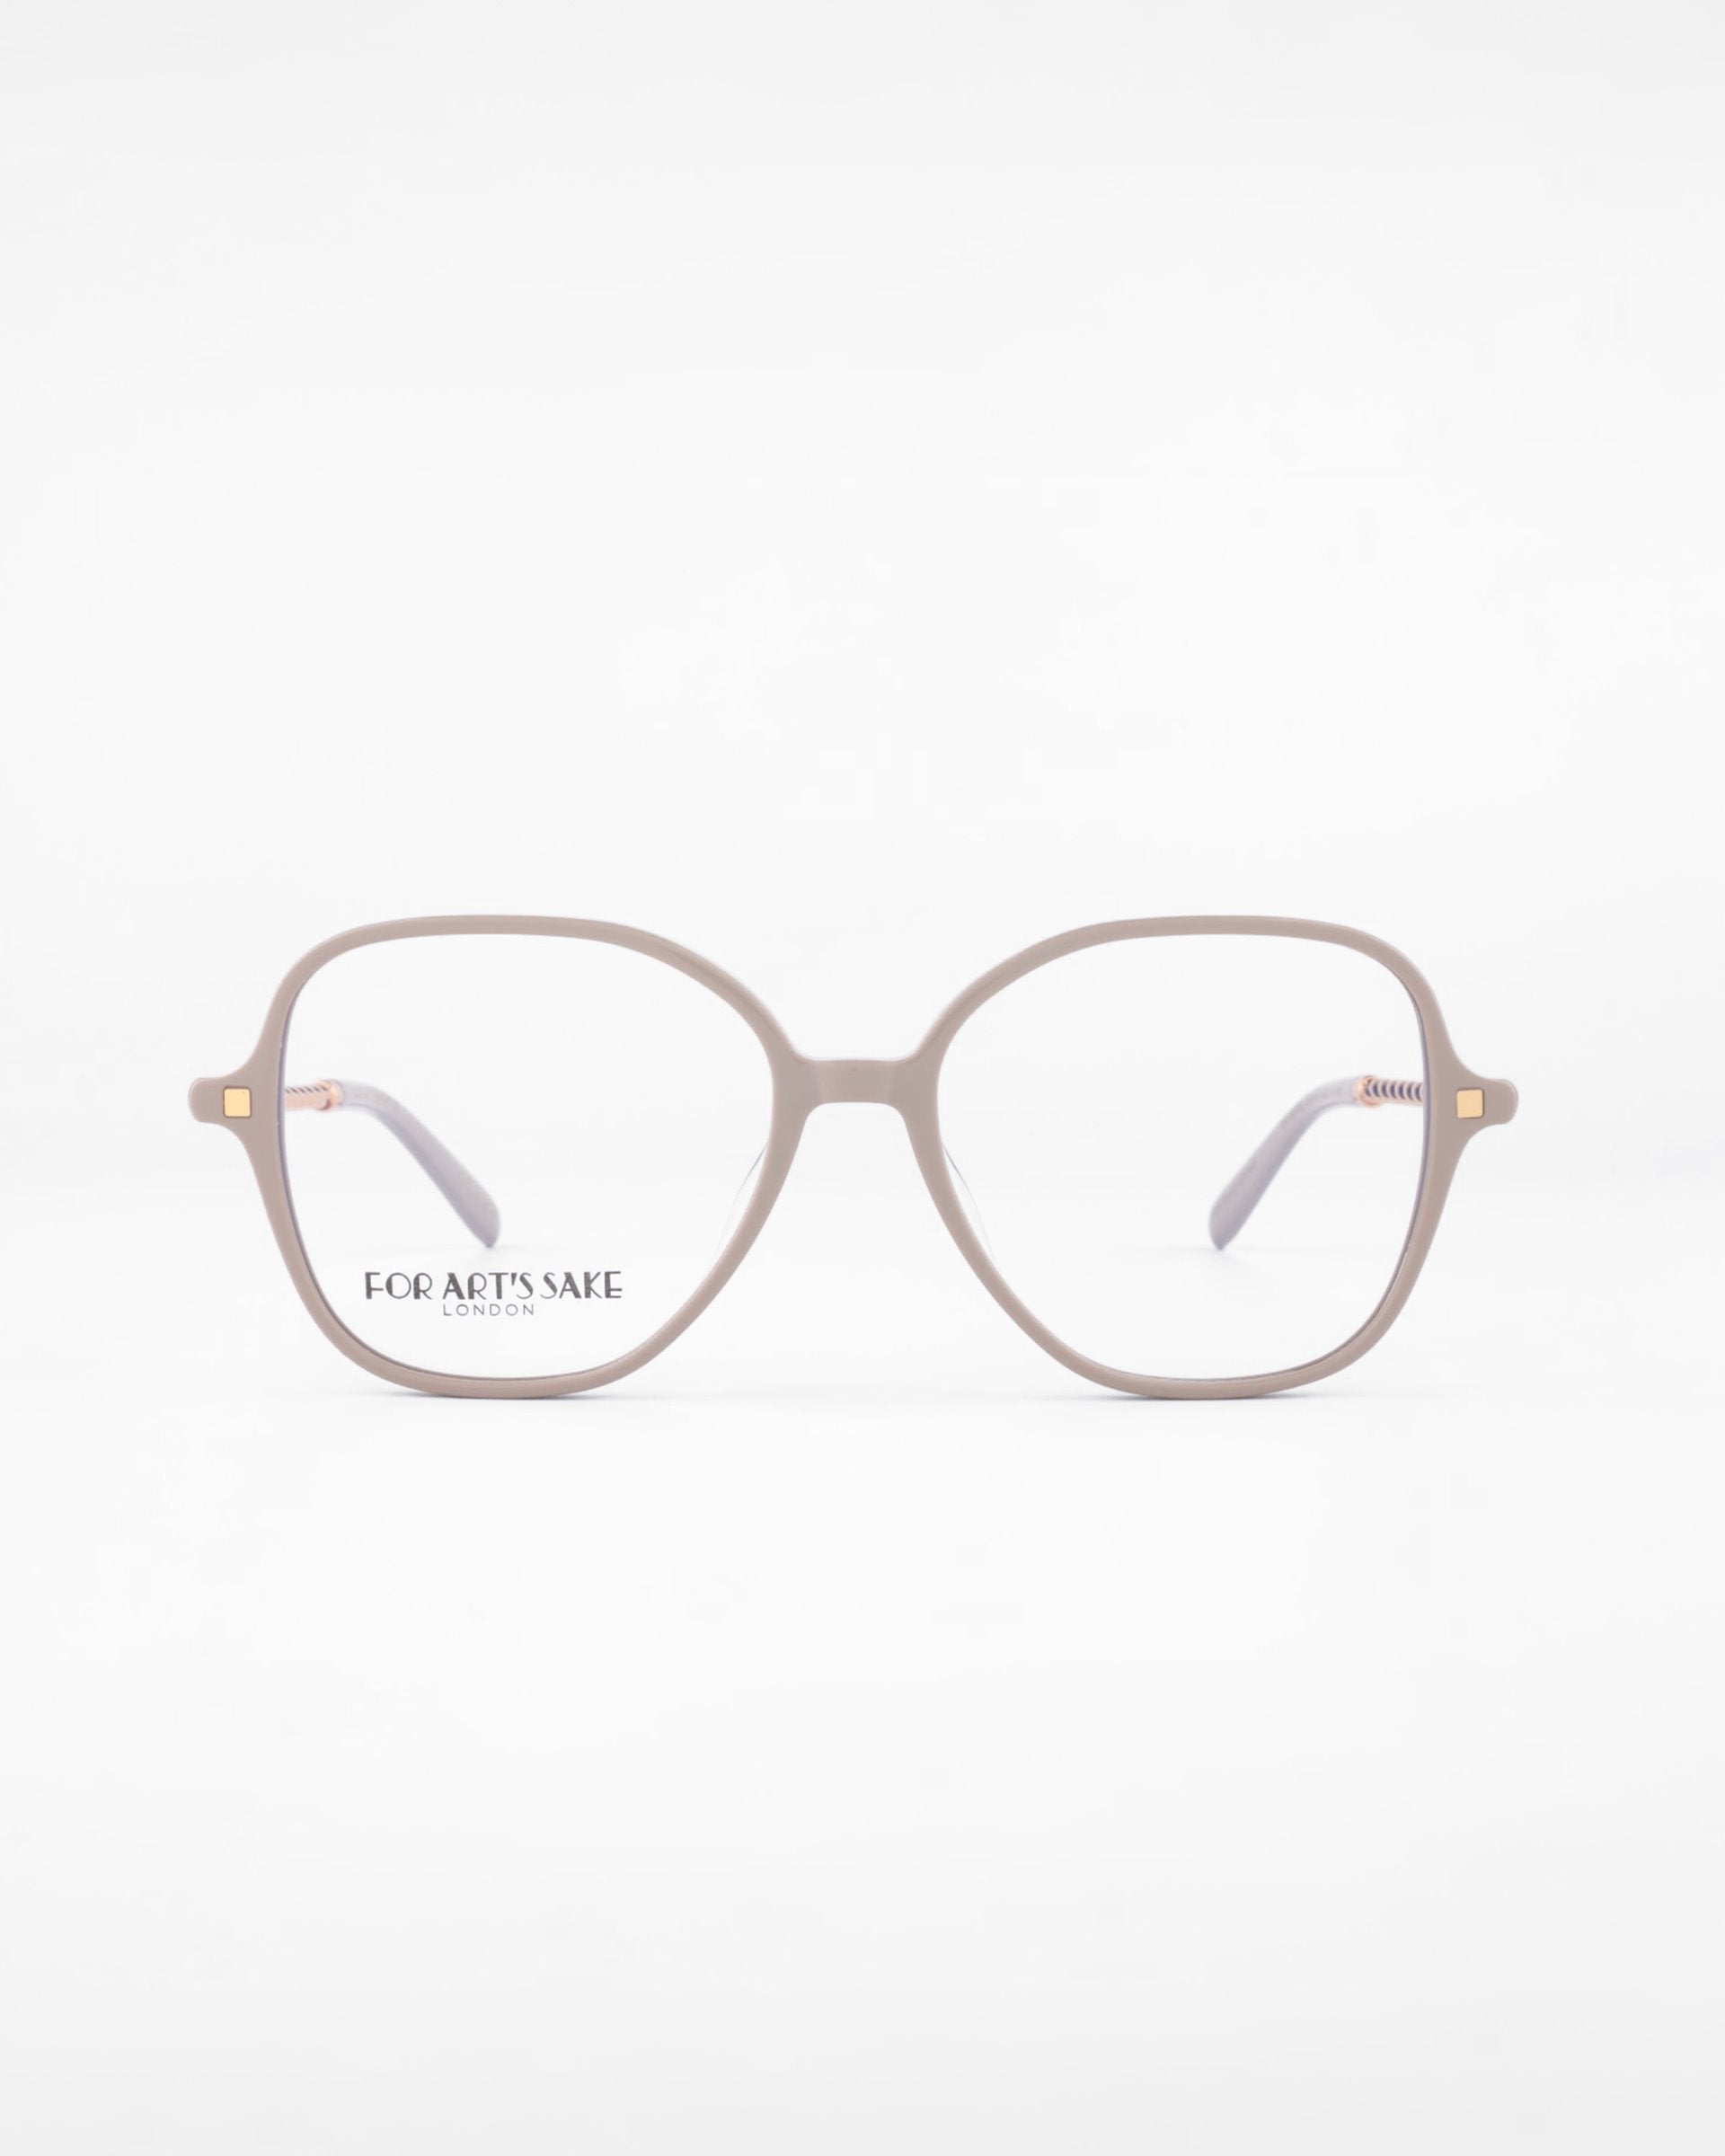 A pair of light grey, oversized eyeglasses with clear lenses set against a white background. These minimalistic eyewear pieces from "For Art's Sake®" feature the brand name on the left lens and temples in a darker grey shade. They come equipped with blue light filter technology for added comfort.